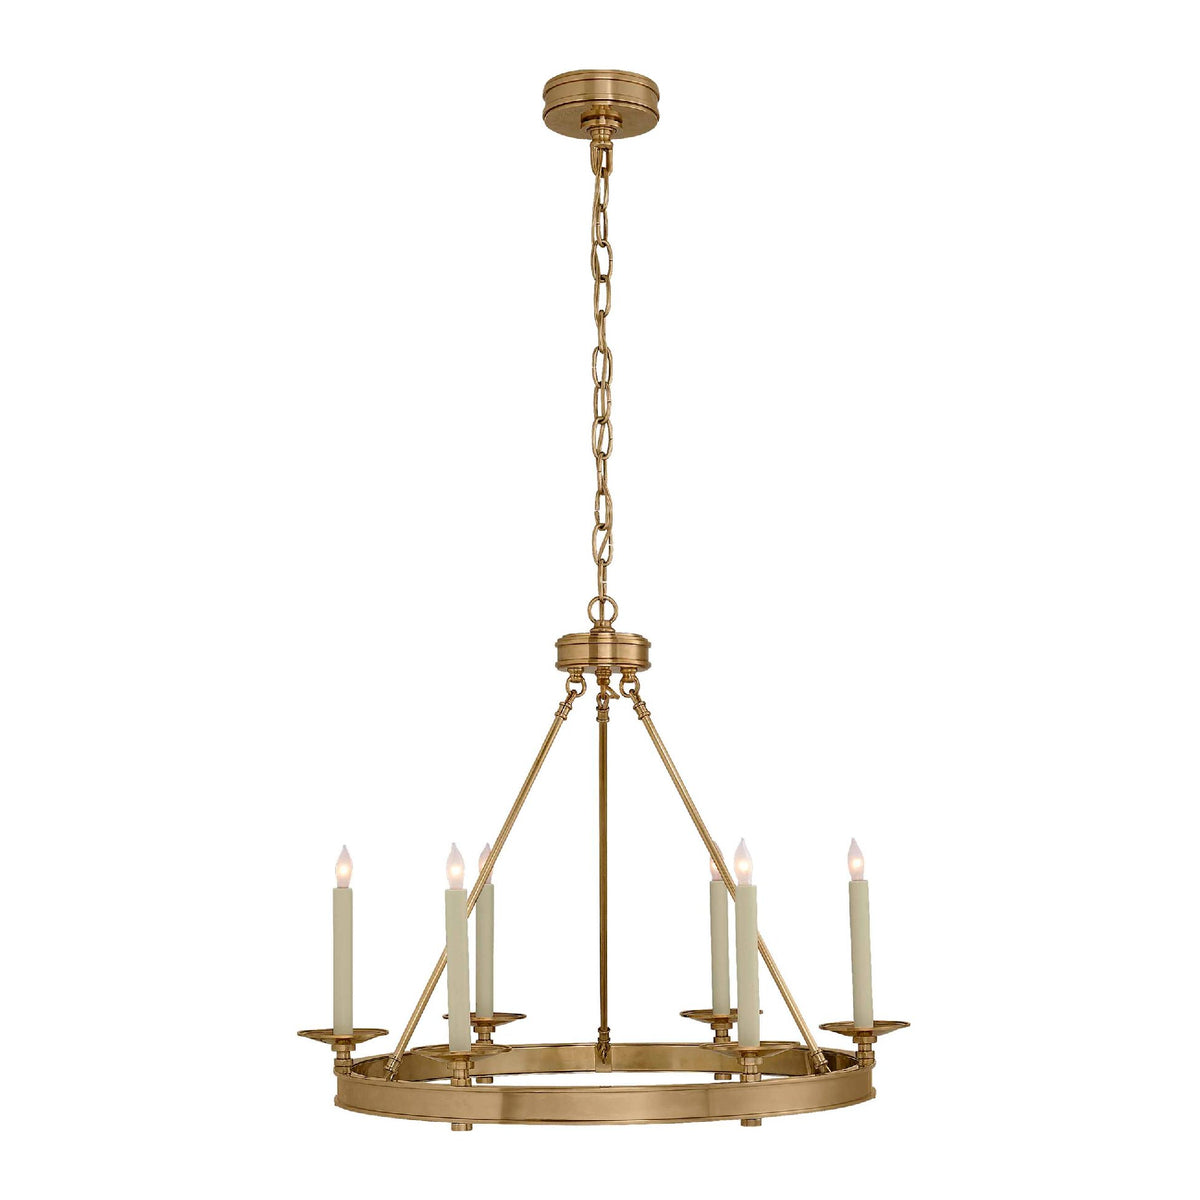 Launceton Small Ring Chandelier in Antique Brass